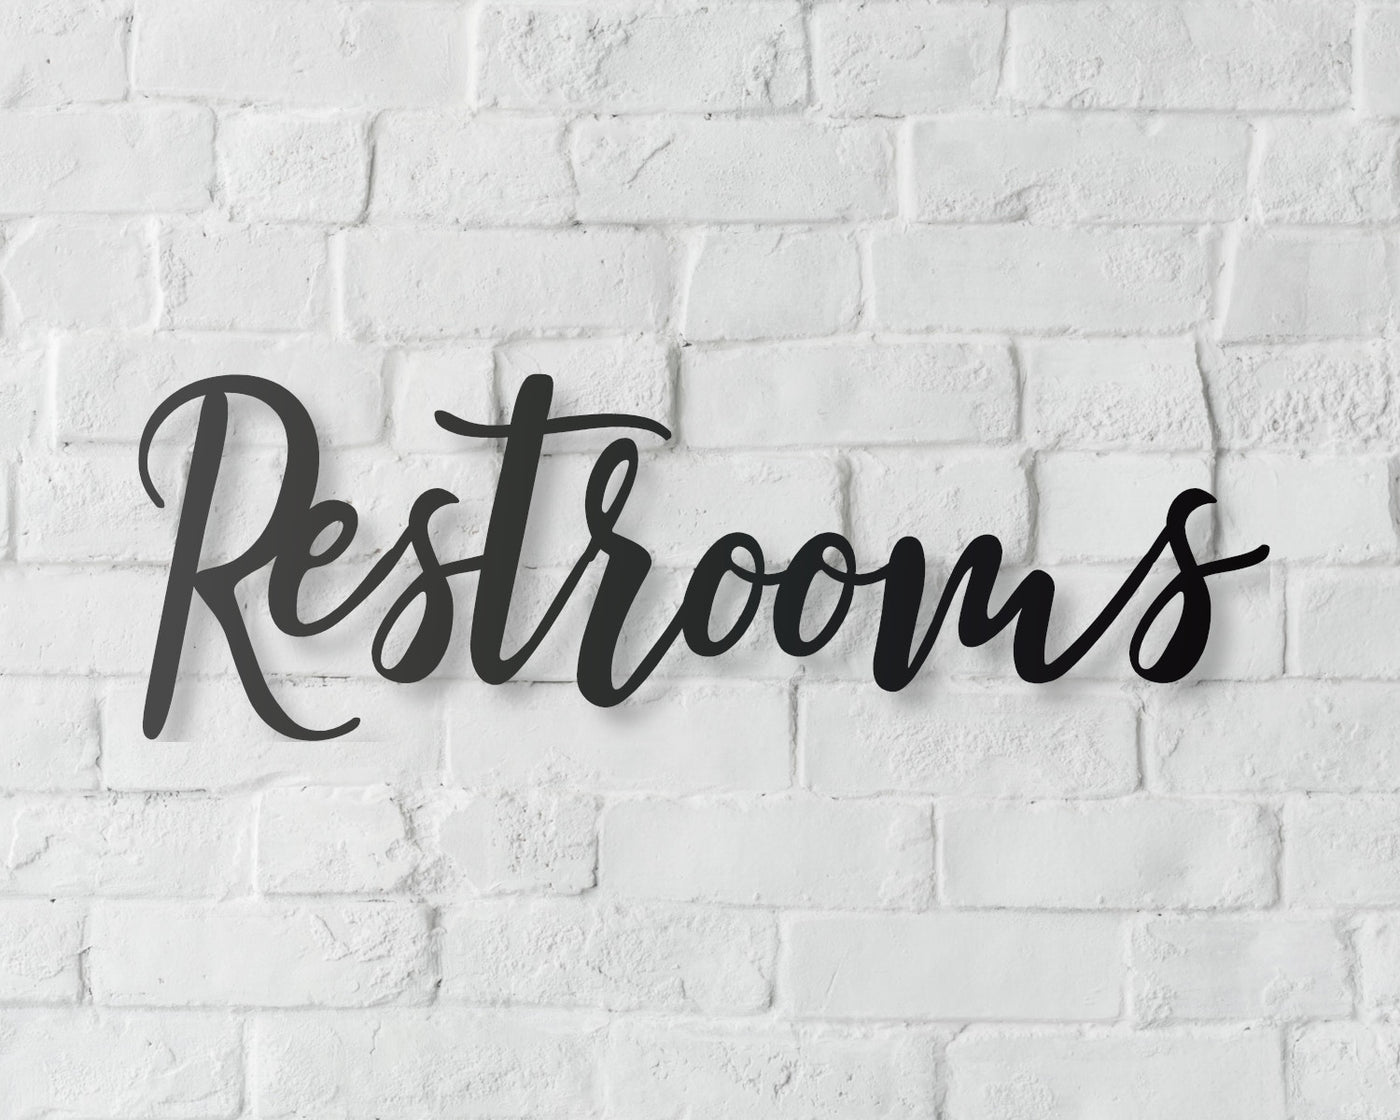 Restroom or Restrooms Sign Metal Word Sign - Madison Iron and Wood - Wall Art - metal outdoor decor - Steel deocrations - american made products - veteran owned business products - fencing decorations - fencing supplies - custom wall decorations - personalized wall signs - steel - decorative post caps - steel post caps - metal post caps - brackets - structural brackets - home improvement - easter - easter decorations - easter gift - easter yard decor